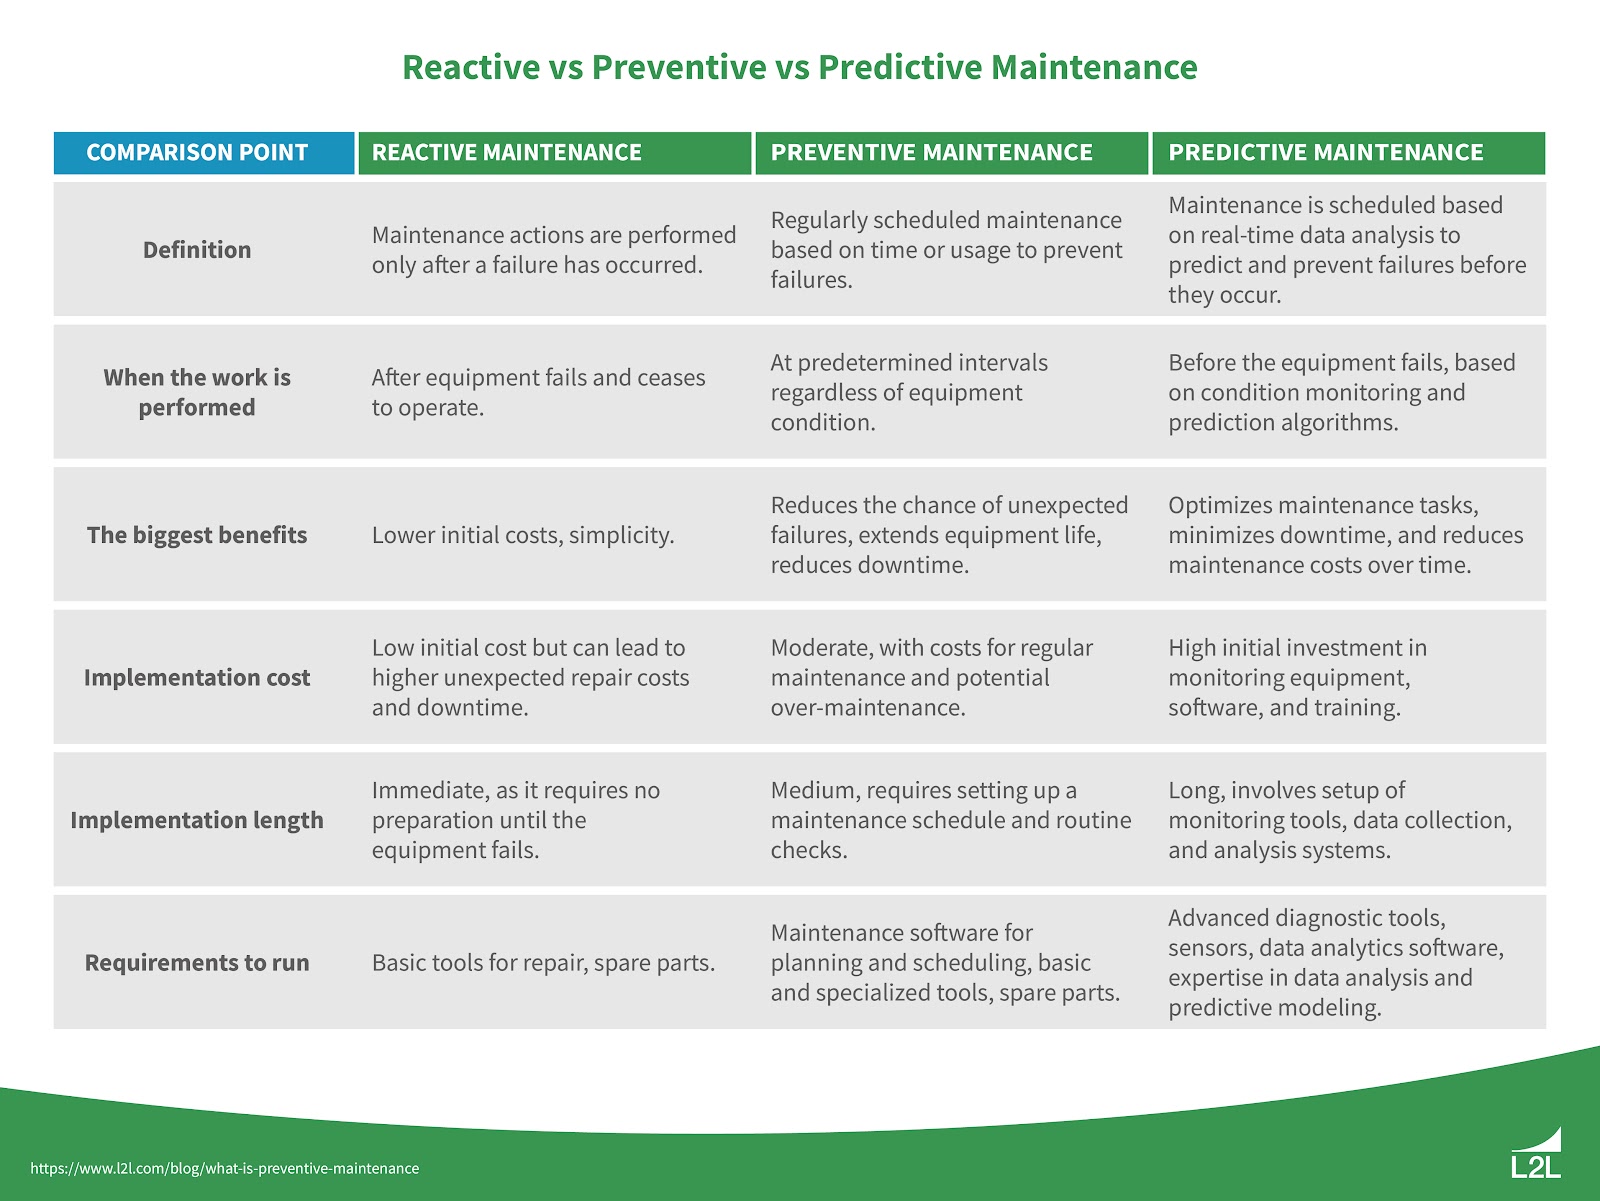 A table showing the differences between reactive, preventive, and predictive maintenance.